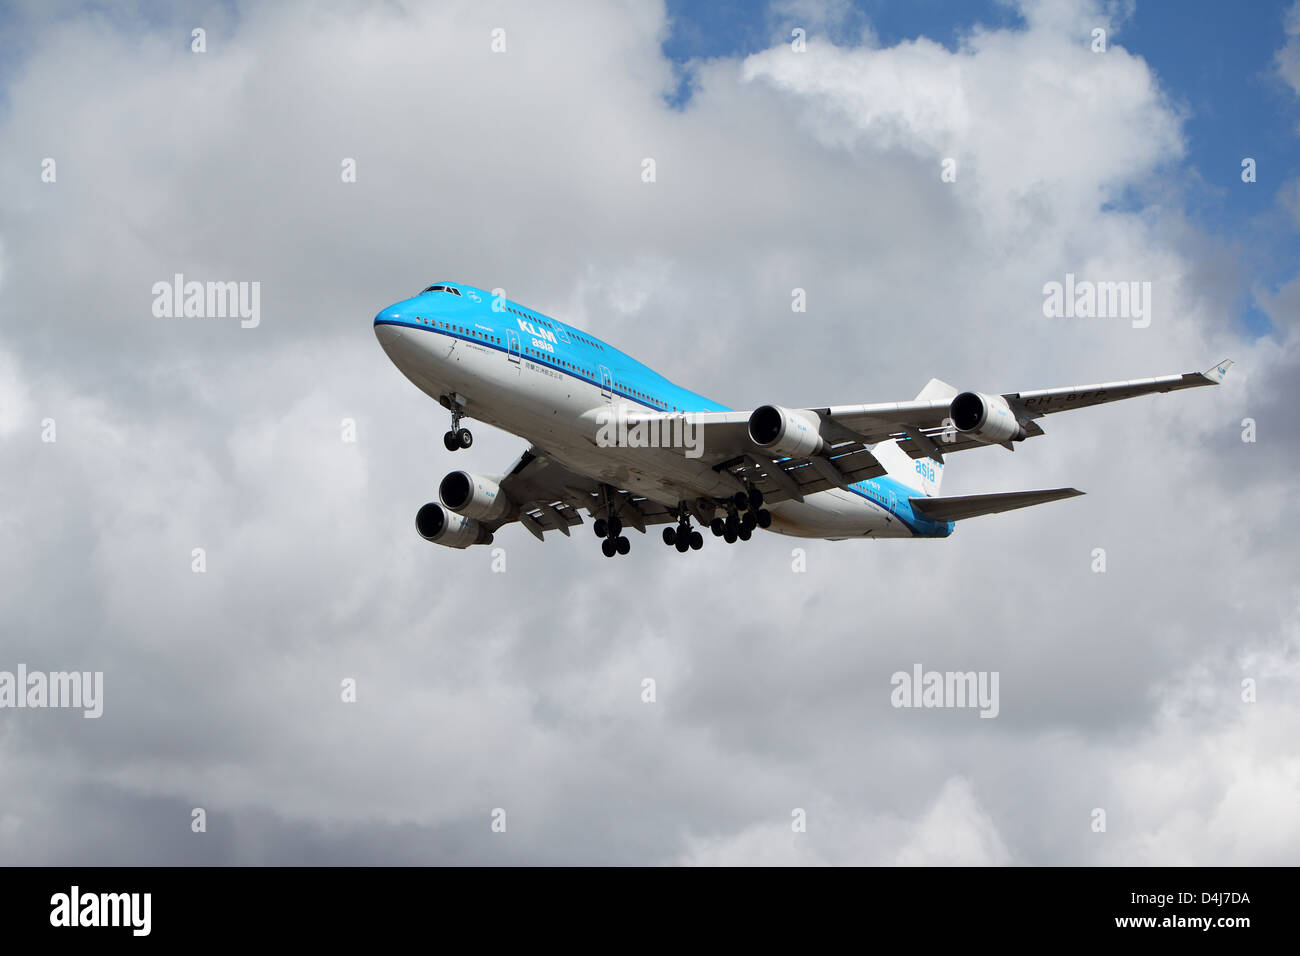 LOS ANGELES, CALIFORNIA, USA - MARCH 8, 2012 - A KLM Boeing 747-400 plane lands at Los Angeles Airport on March 8, 2012. Stock Photo